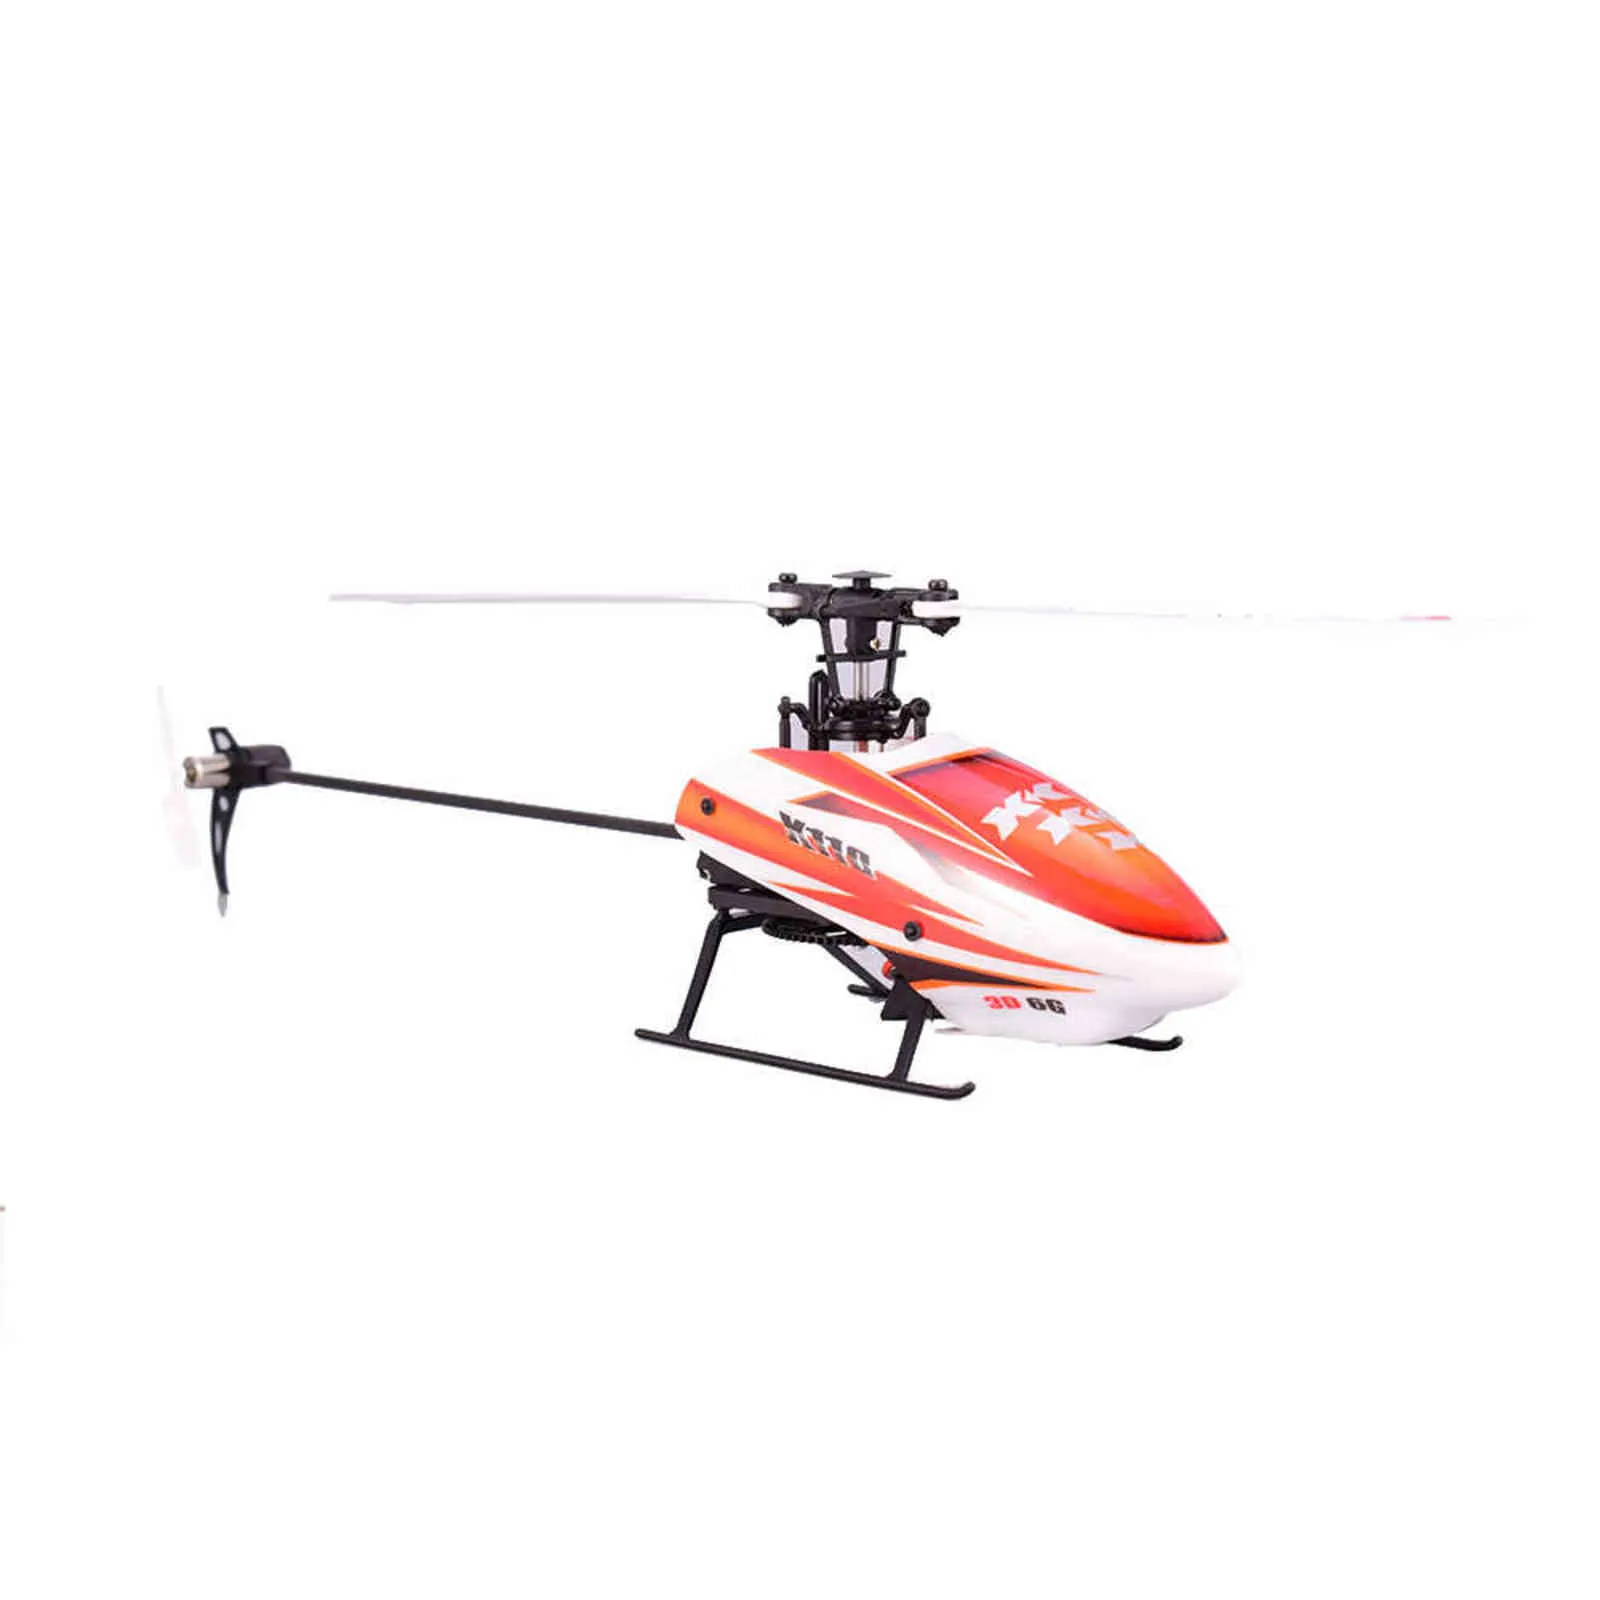 Wltoys XK K110 6CH 3D 6G System Remote Control Brushless RC Helicopter BNF without Transmitter K100K120K123 K124 2111043866655